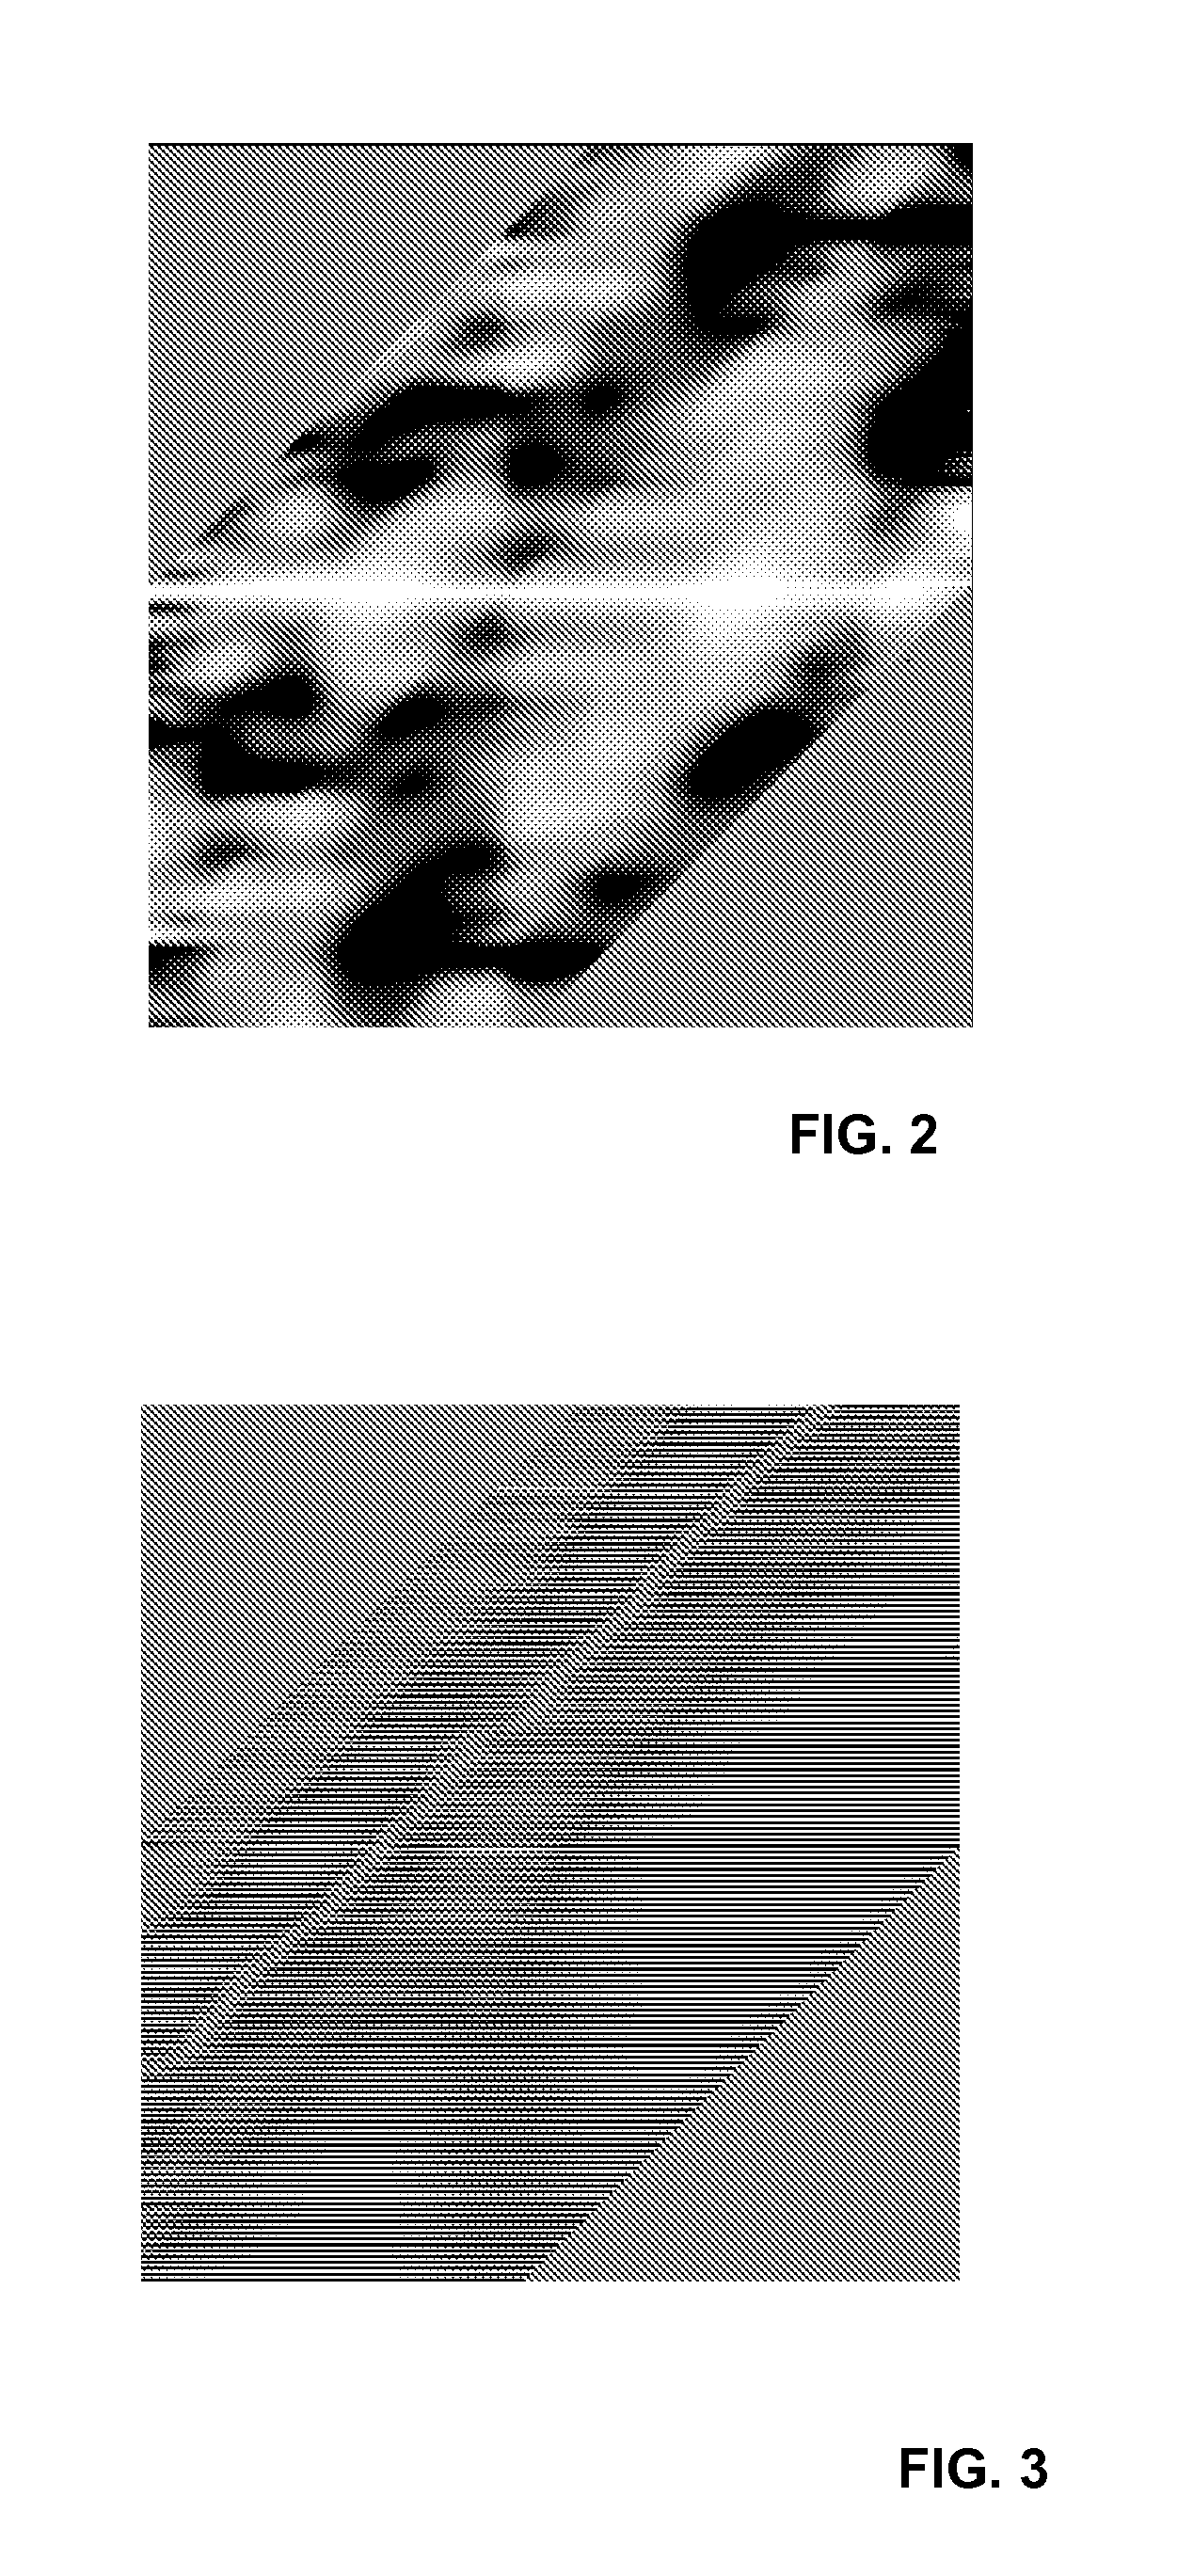 Systems and methods for robust video temporal registration